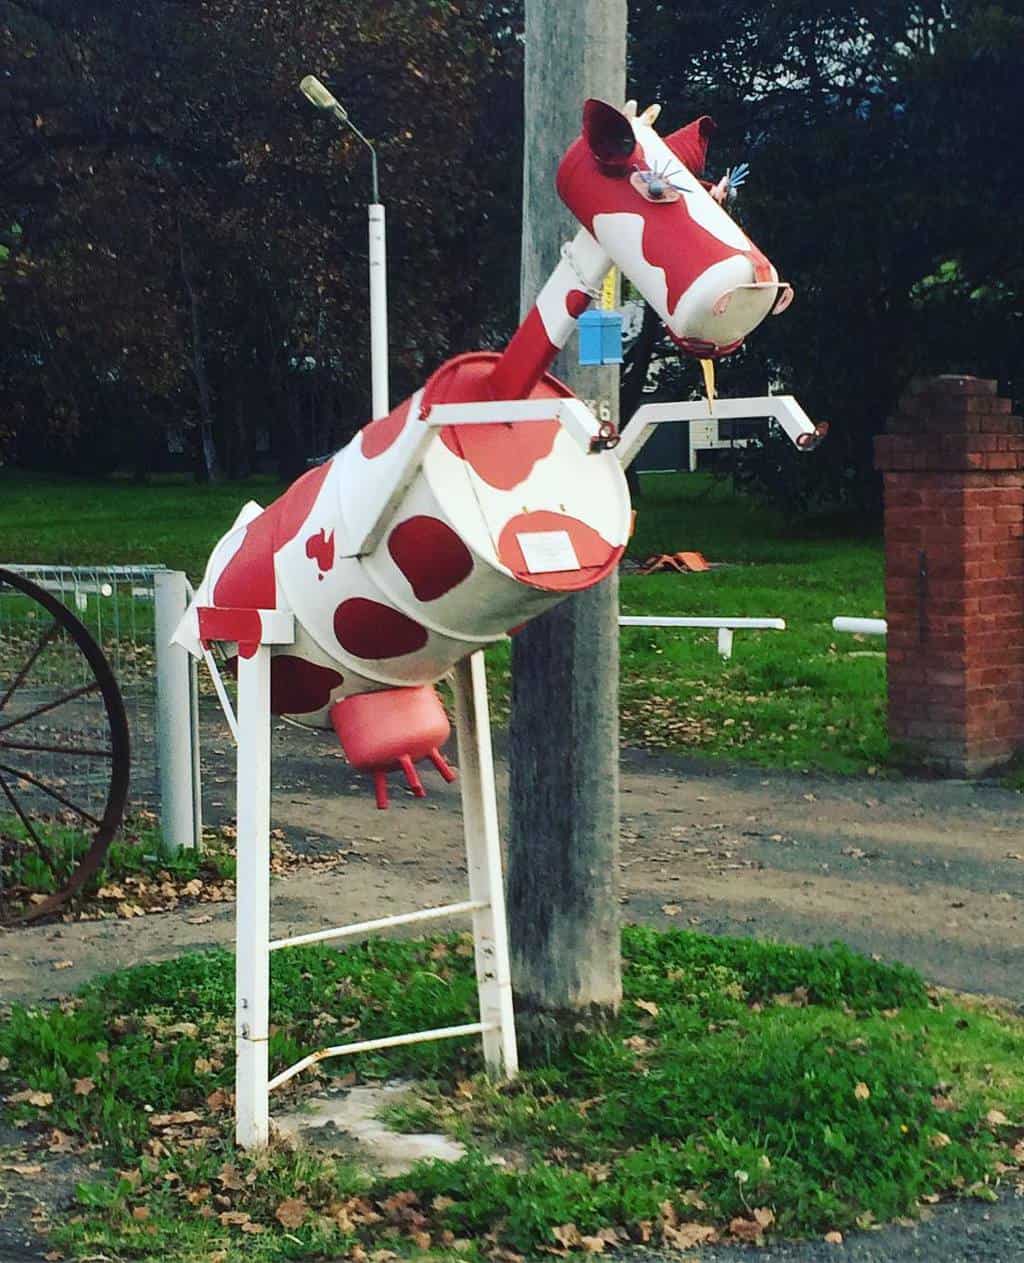 THIS is a cow letterbox, with eyelashes. Must get a lot of mail.